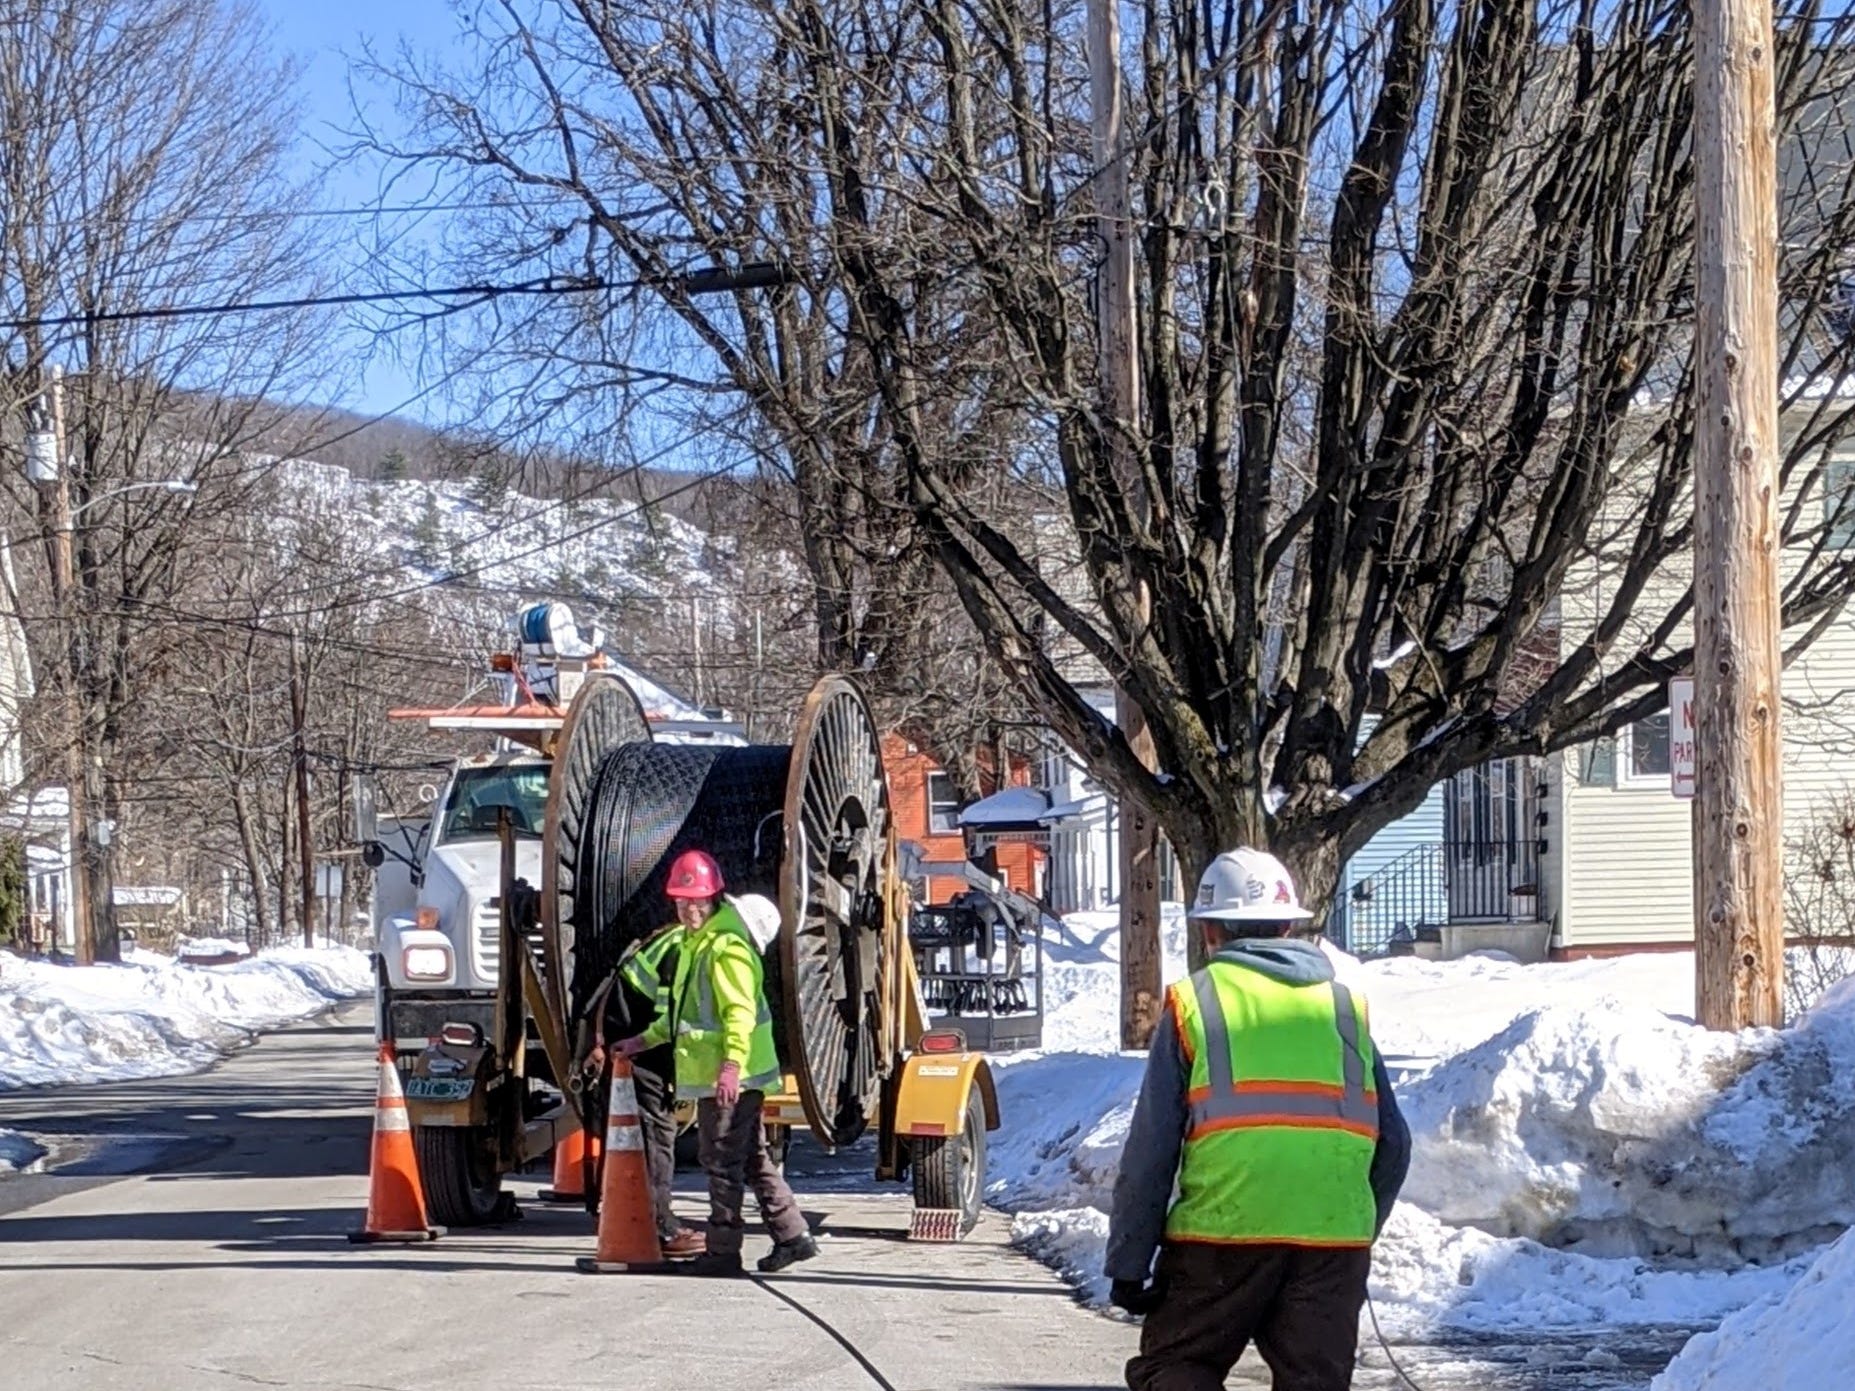 Workers hanging fiber optic cables in Brattleboro. Alex Lockie